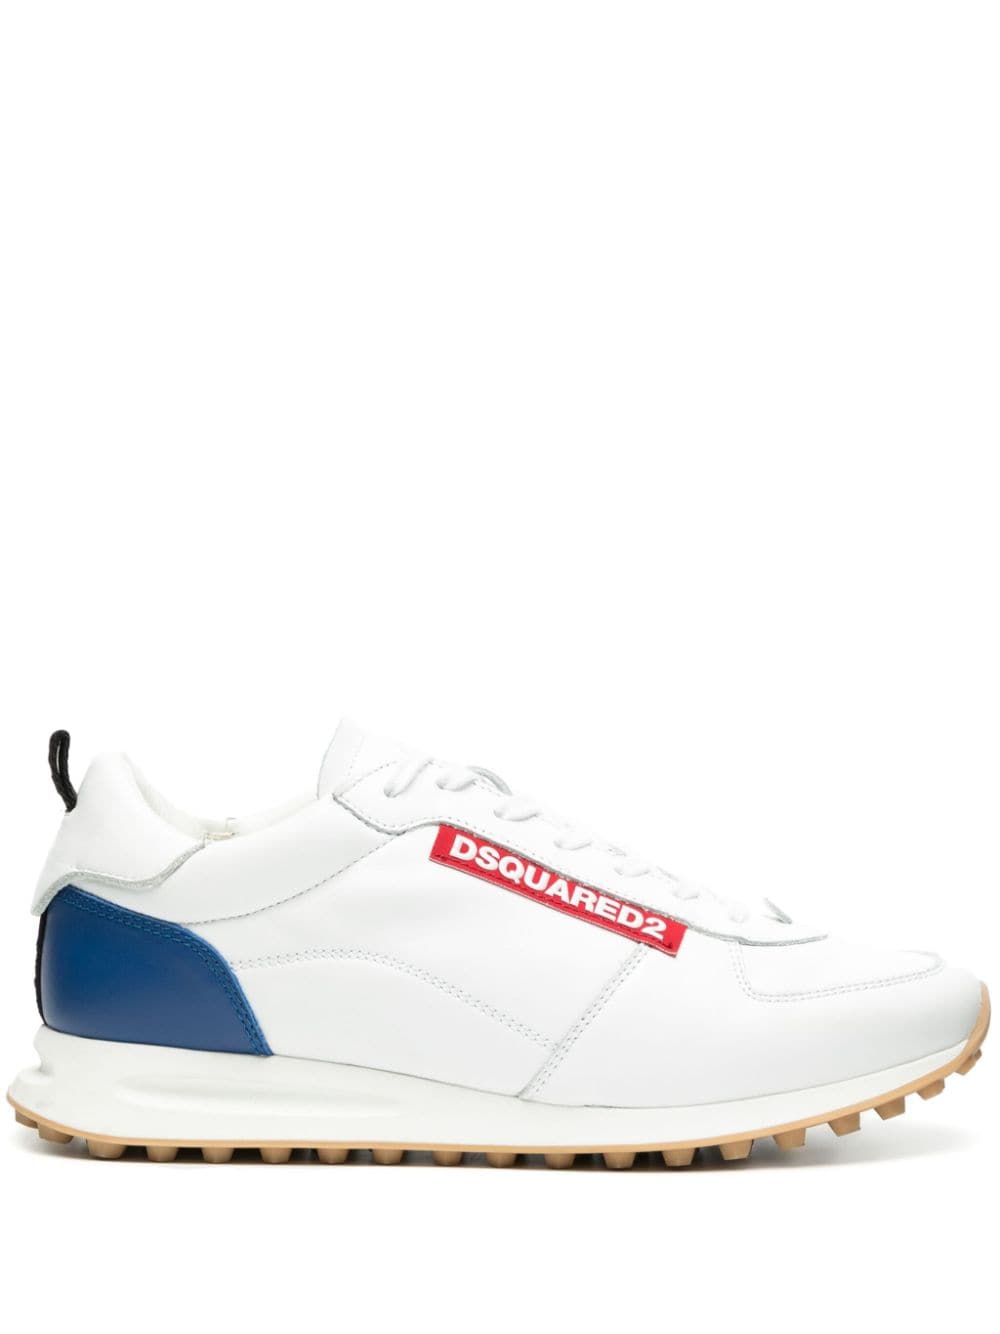 Dsquared2 low-top sneakers - White von Dsquared2